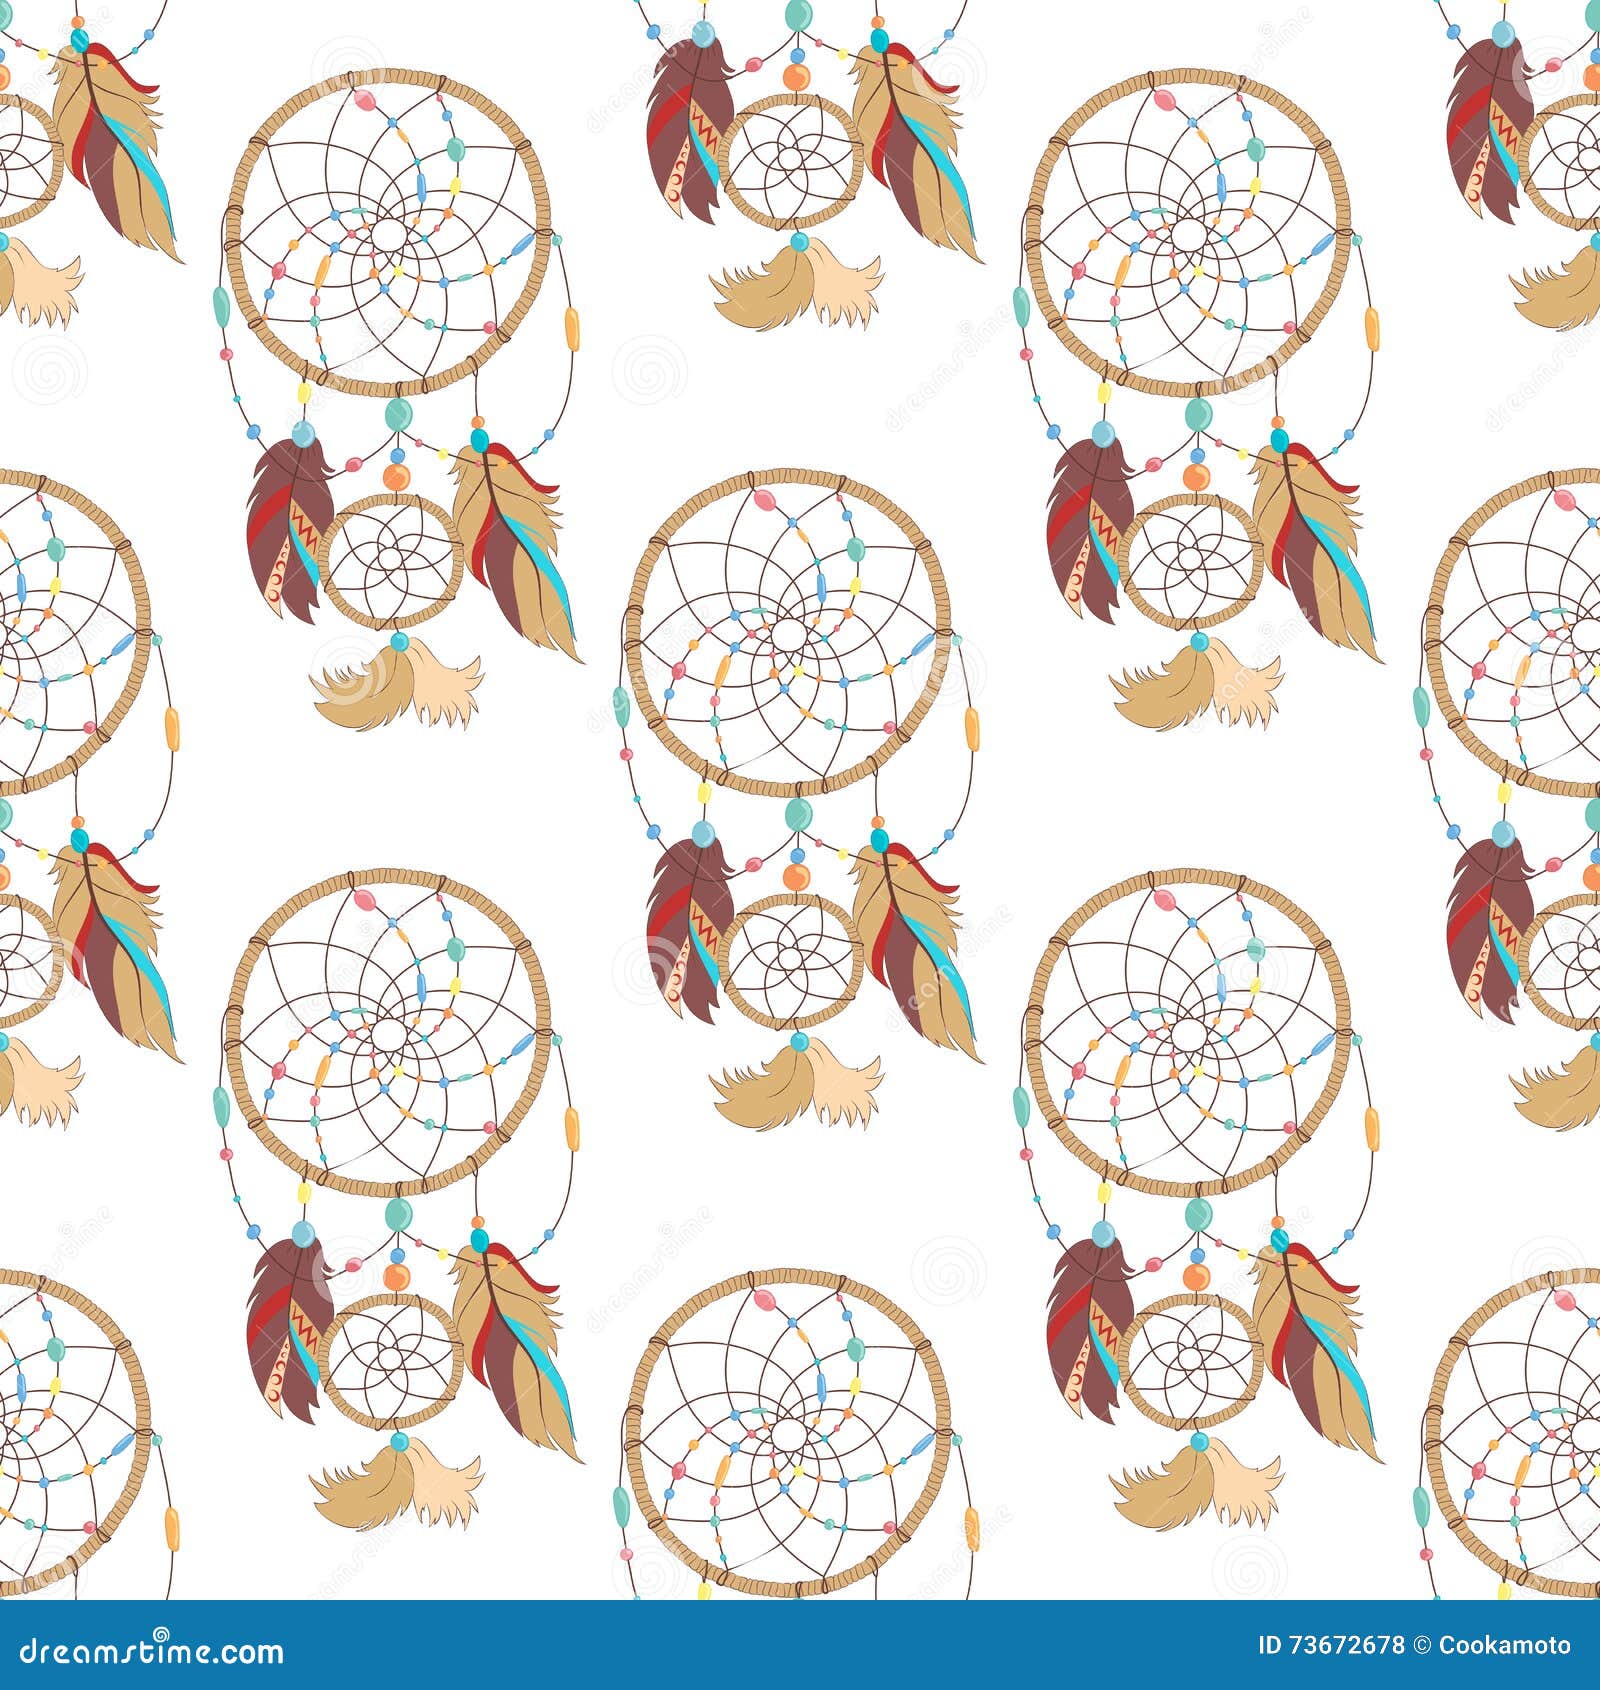 seamless pattern of mysterious and magical indian ojibwe dreamcatcher.